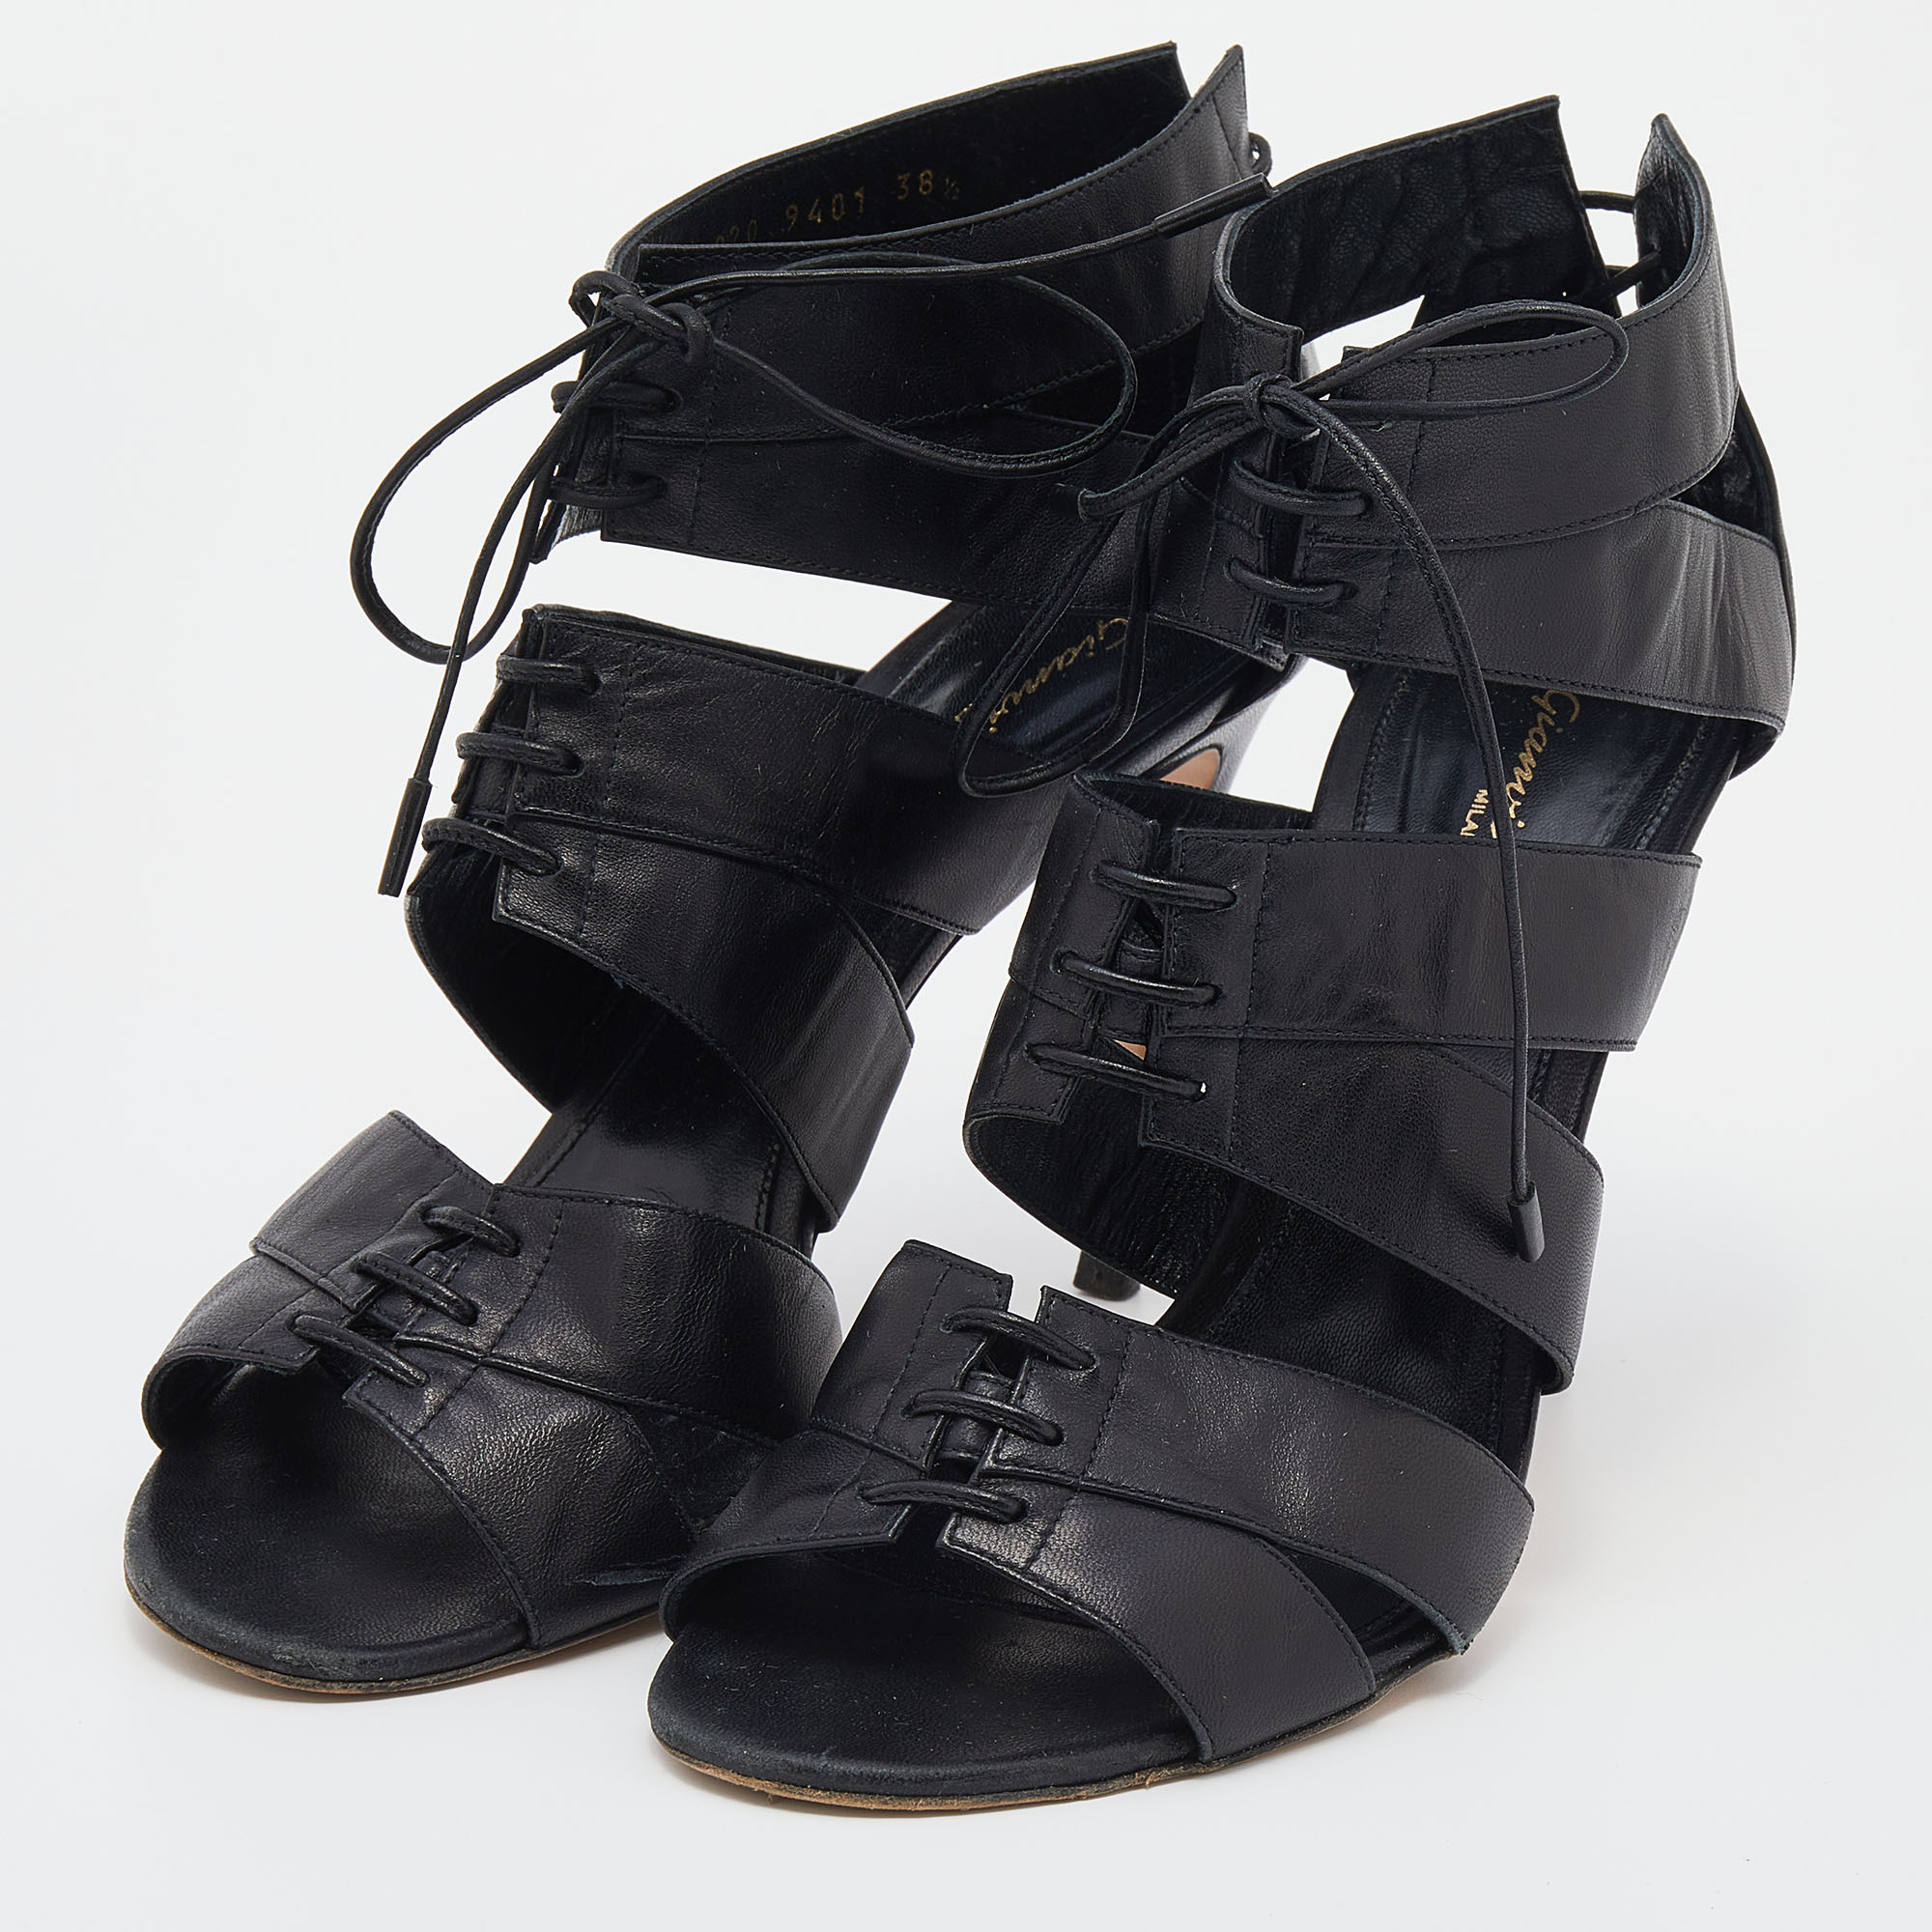 

Gianvito Rossi Black Leather Roxy Lace Up Caged Sandals Size